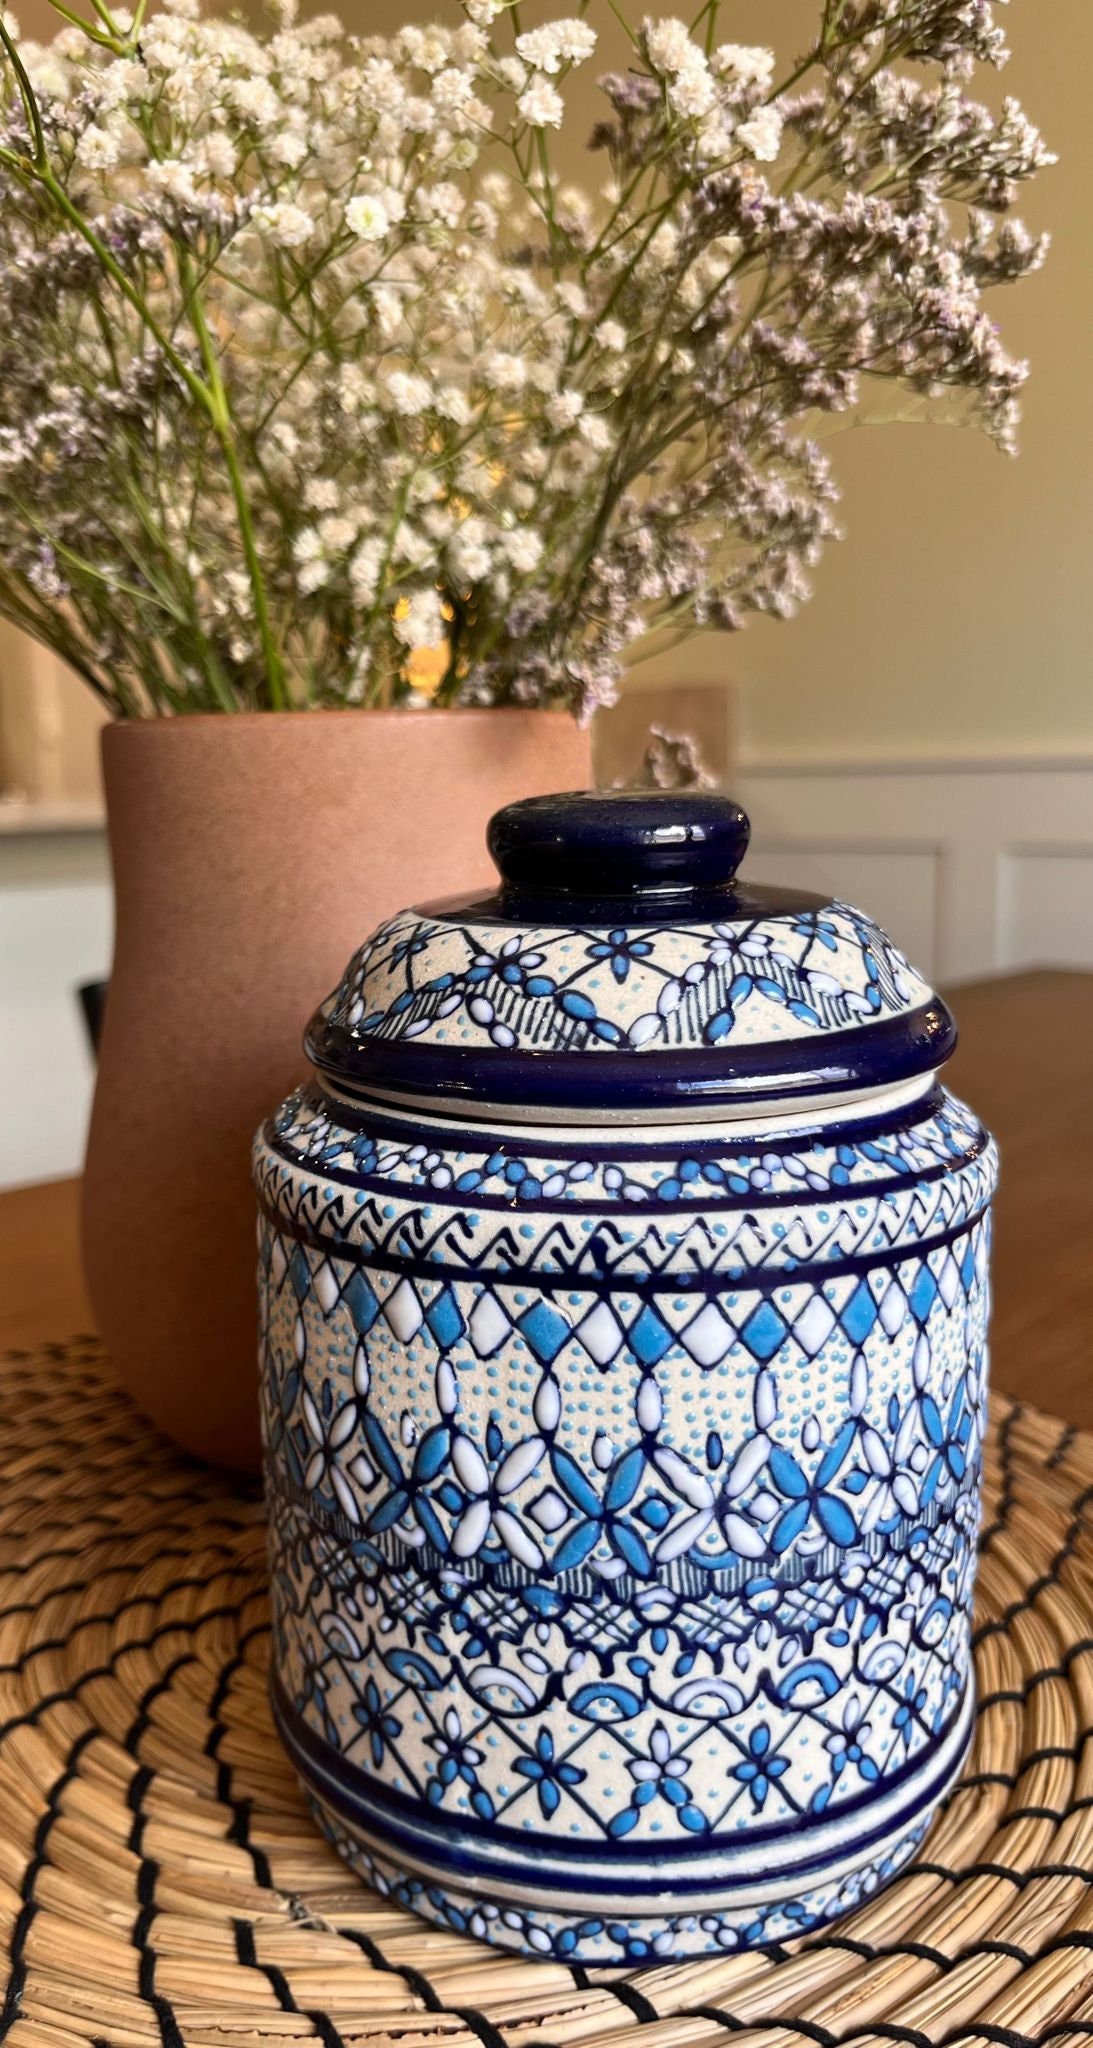 Talavera XL Cookie Jar, Cookie Canister, by Tabletops Unlimited